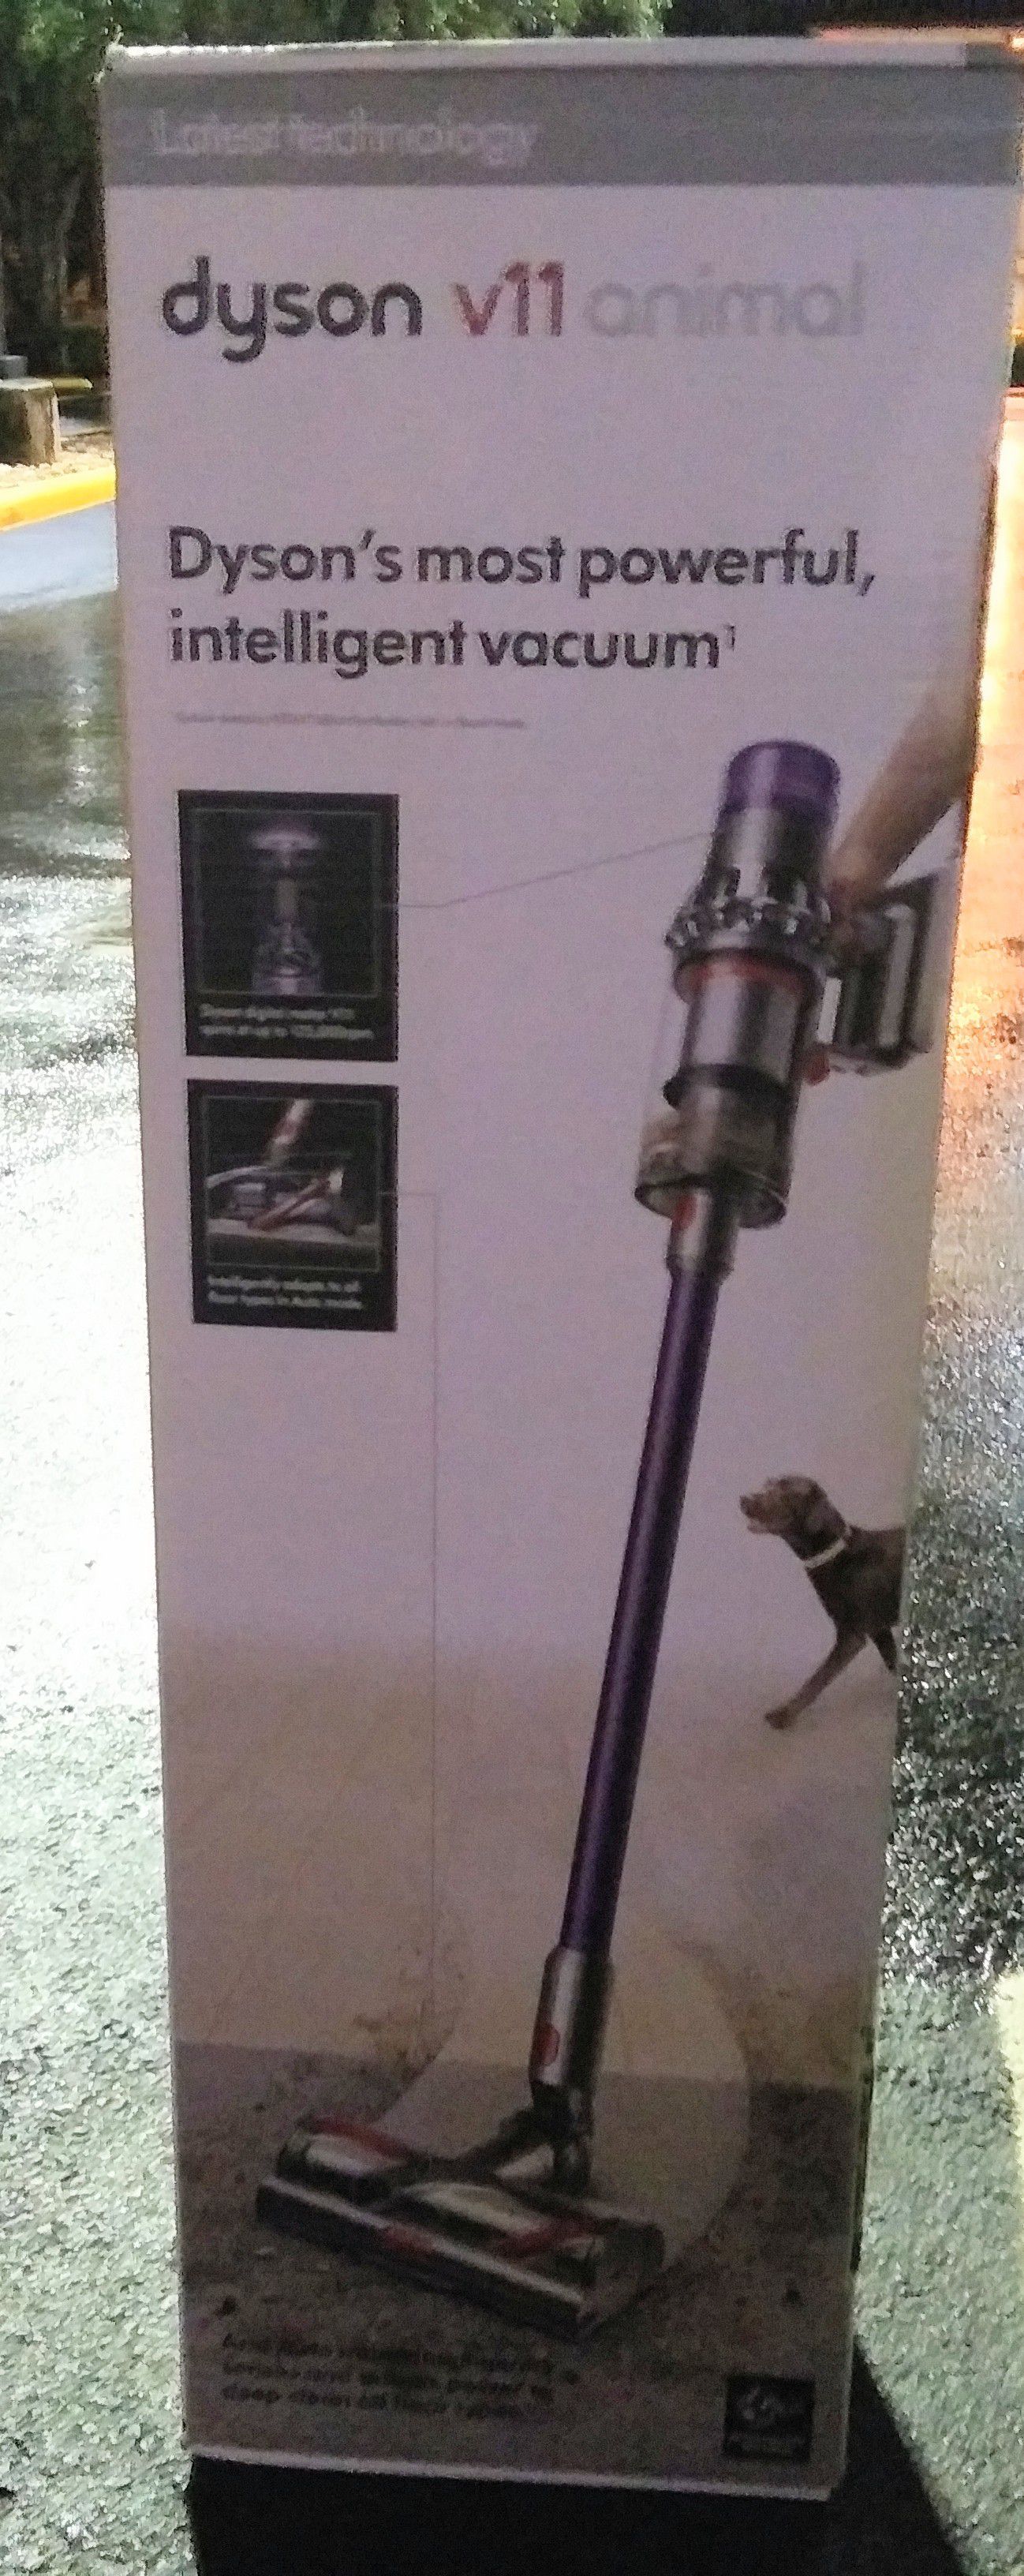 DYSON V11 ANIMAL * Brand New * Full Warranty* Strongest Cordless VACCUUM in the WORLD*